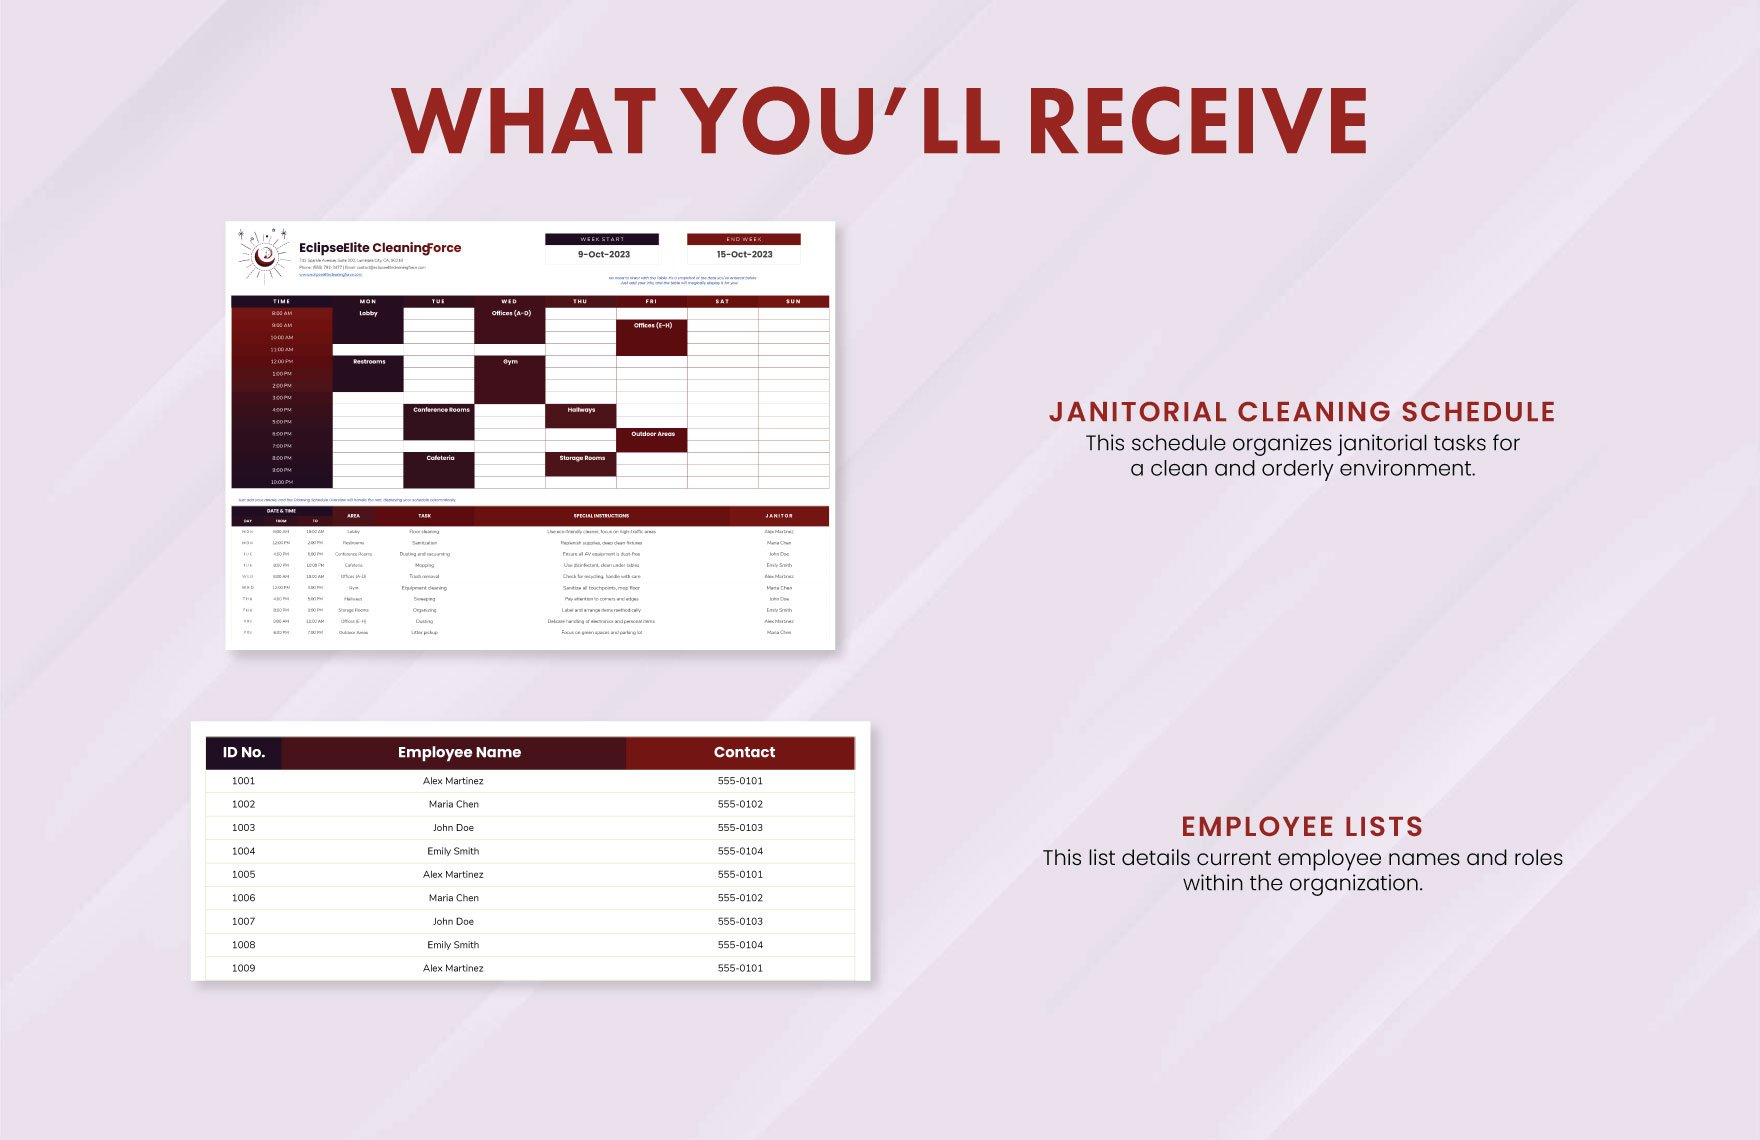 Janitorial Cleaning Schedule Template